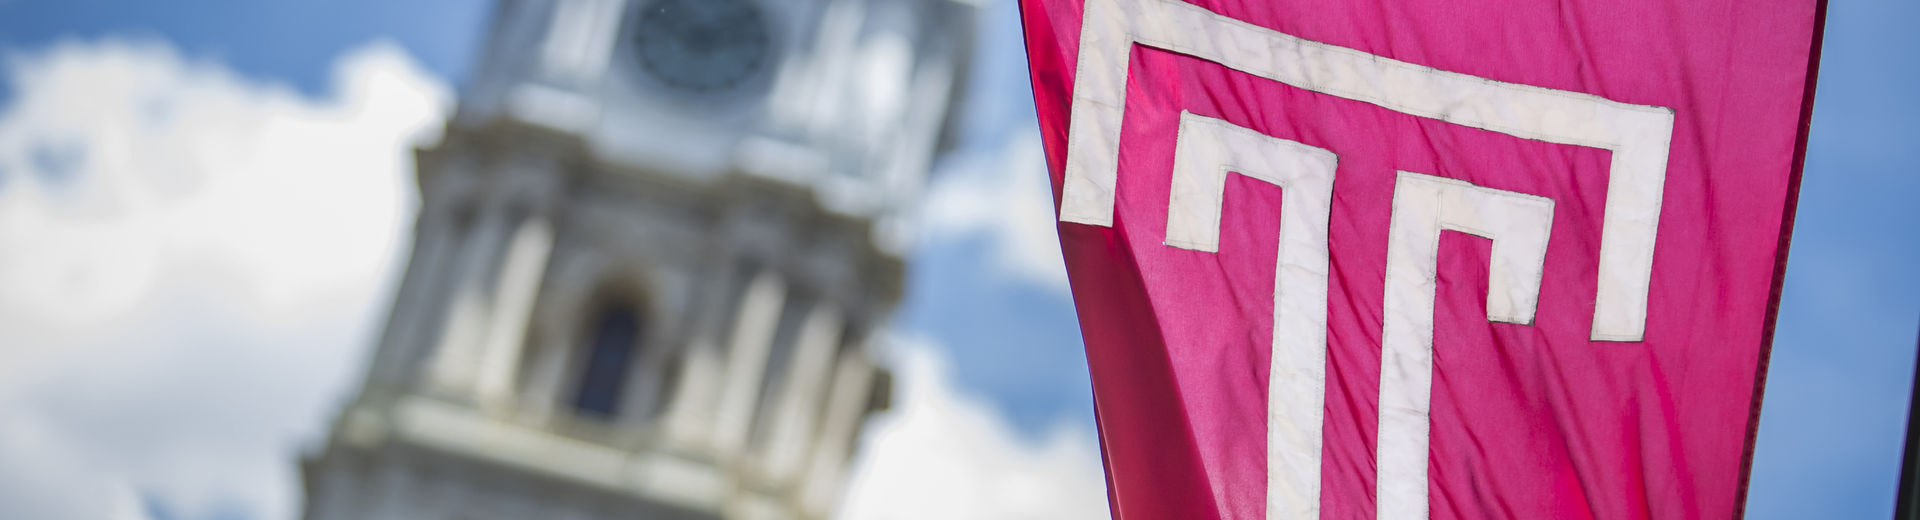 The cherry red Temple T flag waving in front of Philadelphia City Hall on a sunny day.